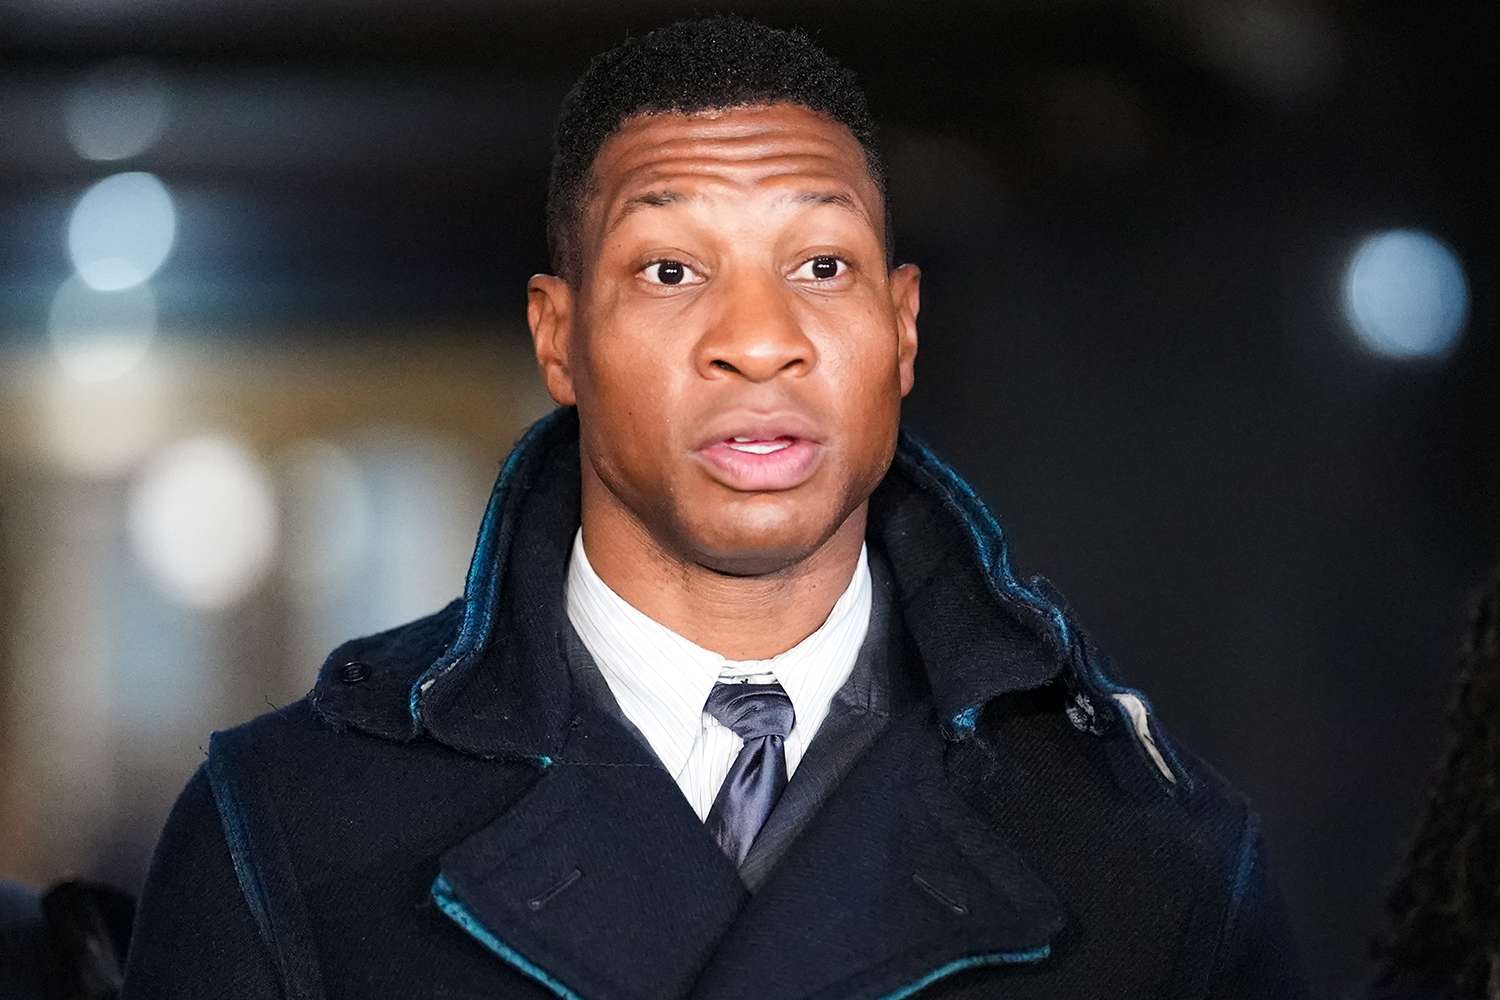 Jonathan Majors: What now for the Marvel universe and his career? post thumbnail image